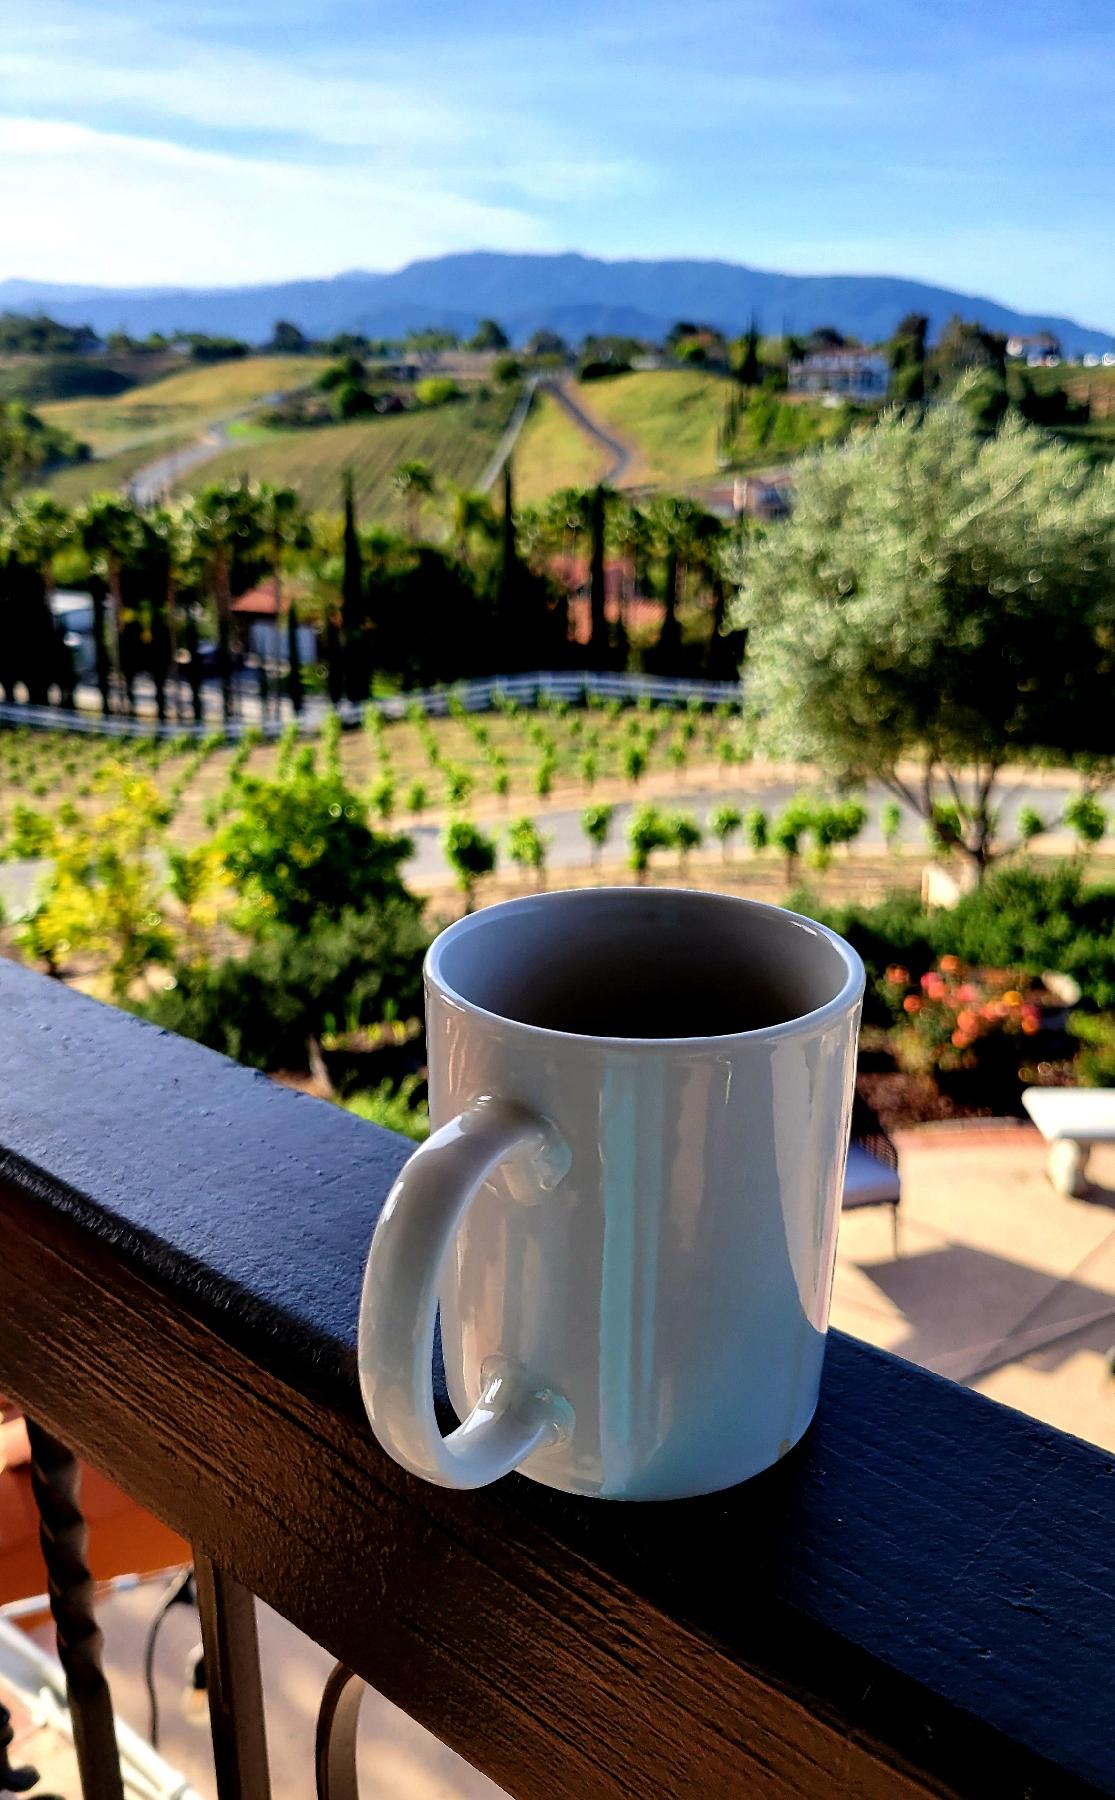 A day in Temecula, California, might begin with coffee on your balcony at Europa Village Wineries Resort. (Photo courtesy of Jim Farber.)